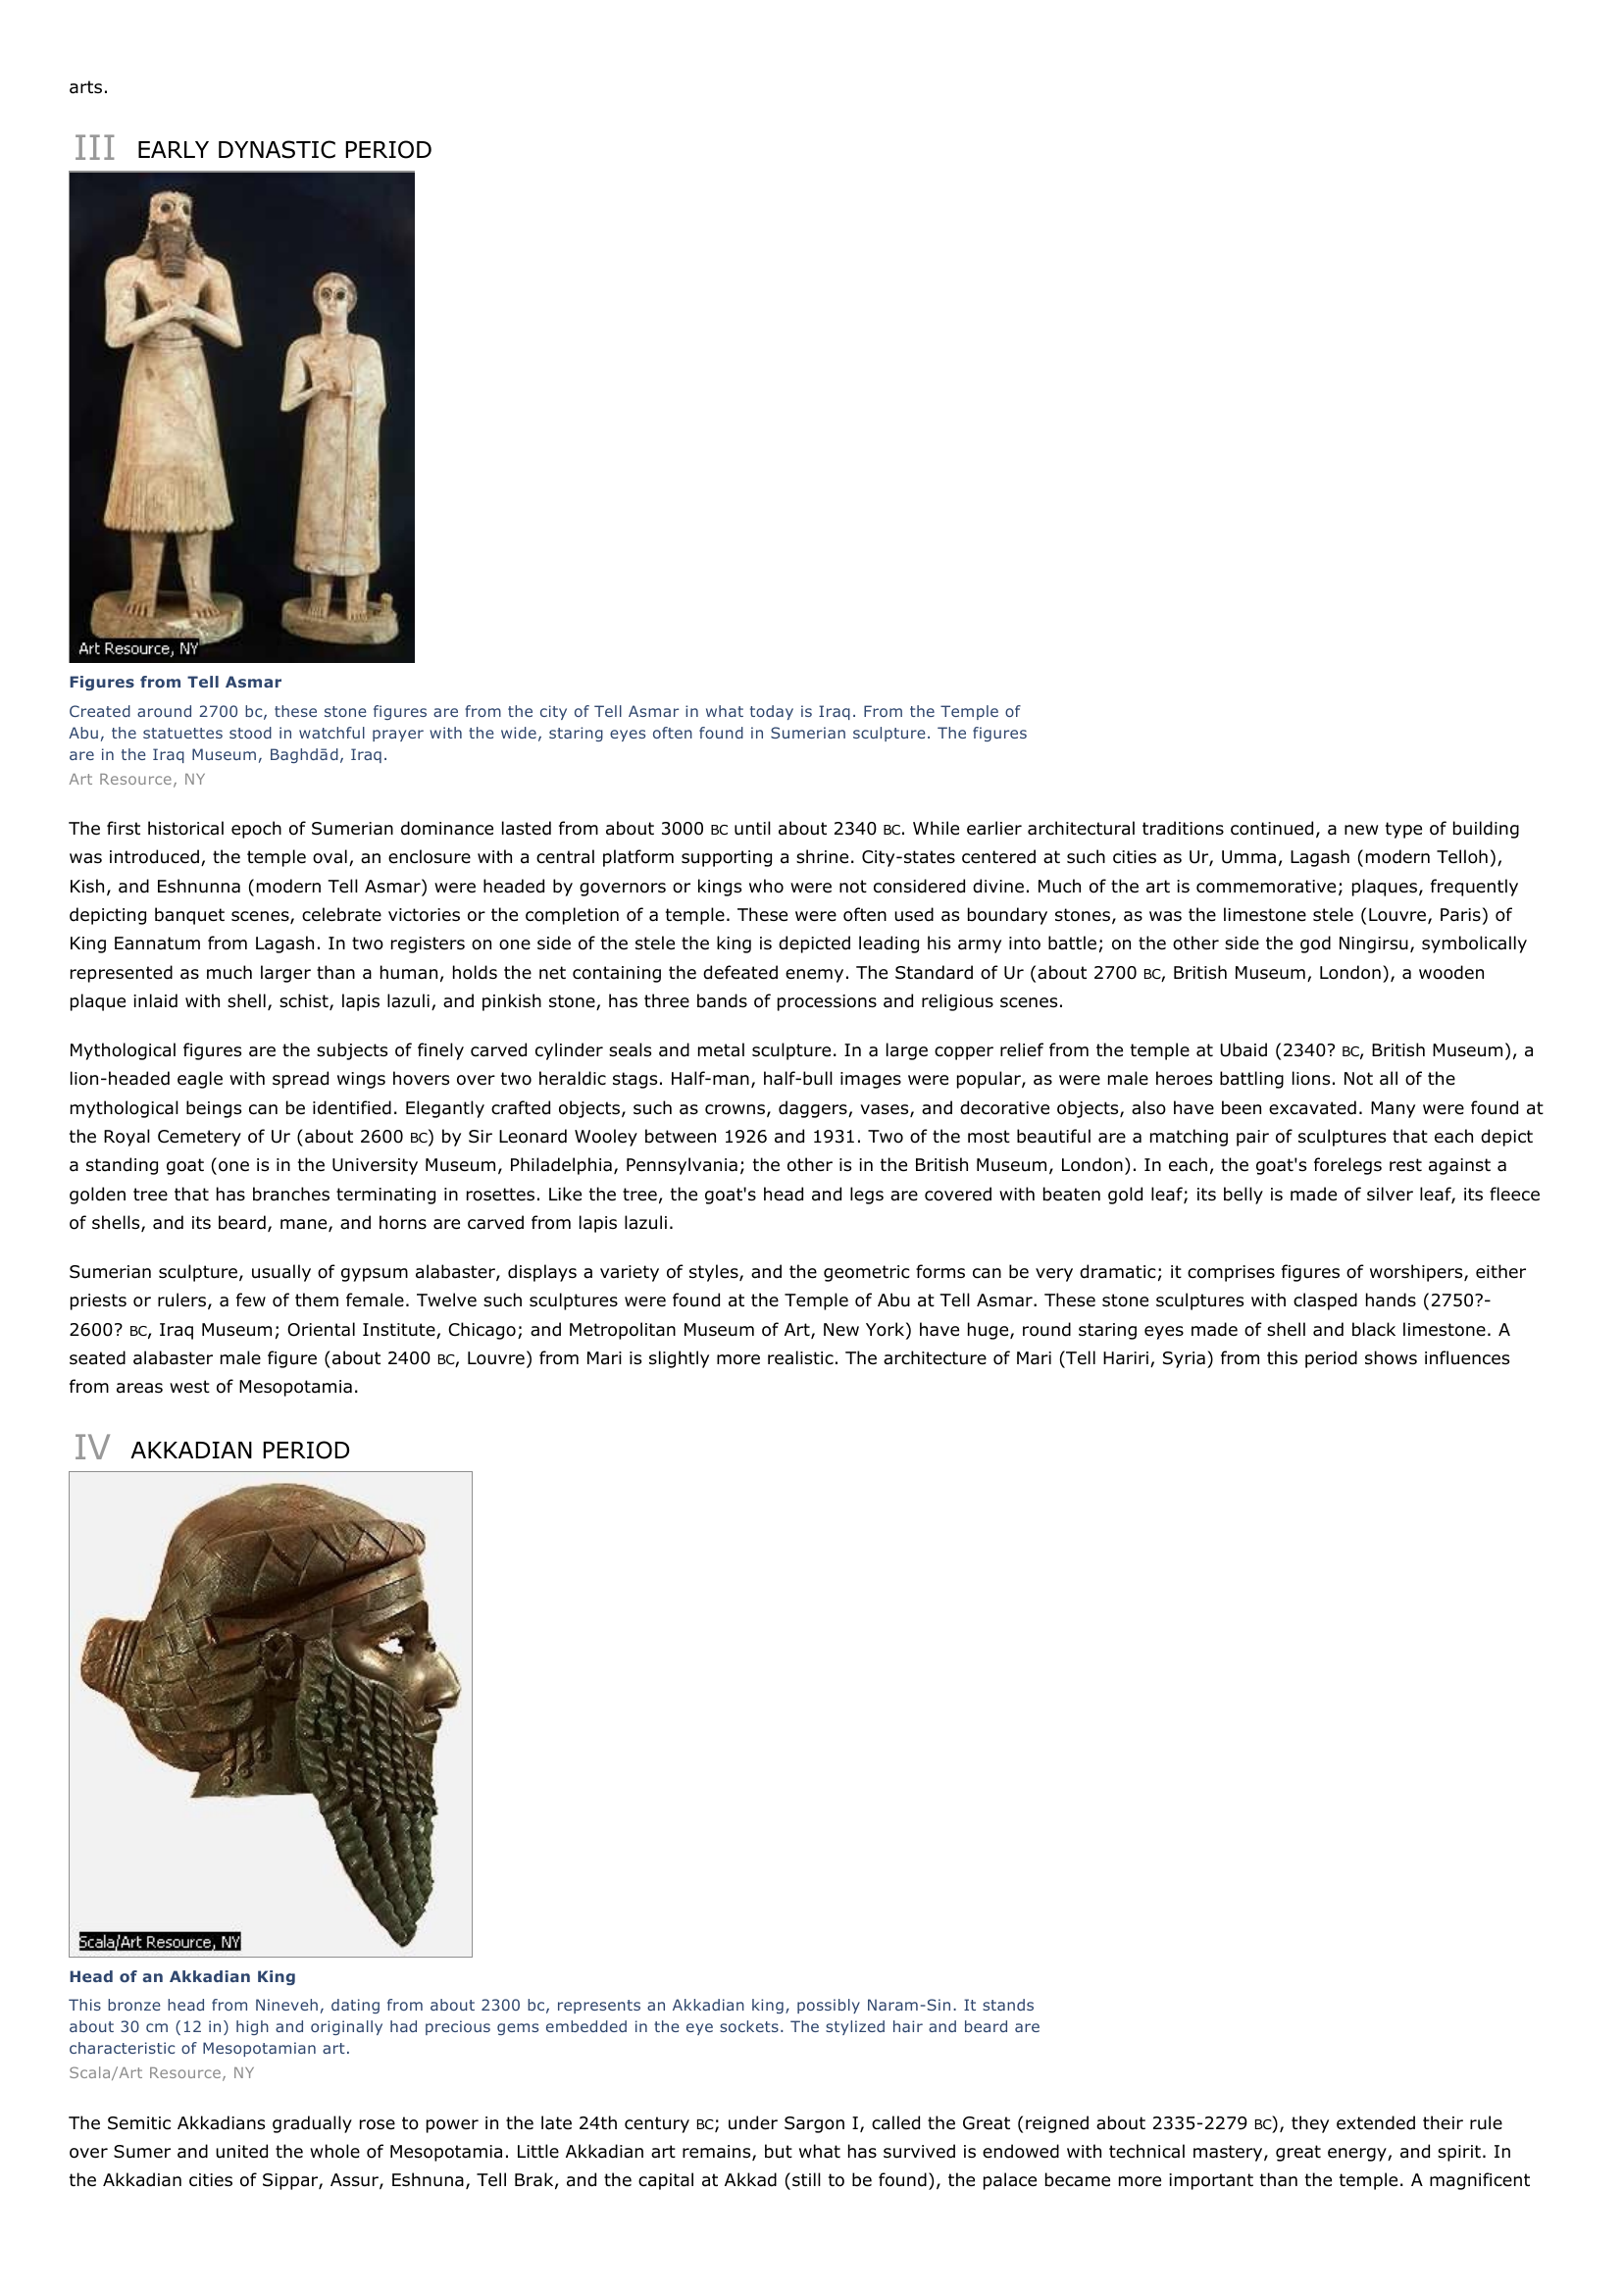 Prévisualisation du document Mesopotamian Art and Architecture
I

INTRODUCTION

Mesopotamian Art and Architecture, the arts and buildings of the ancient Middle Eastern civilizations that developed in the area (now Iraq) between the Tigris and
Euphrates rivers from prehistory to the 6th century

BC.